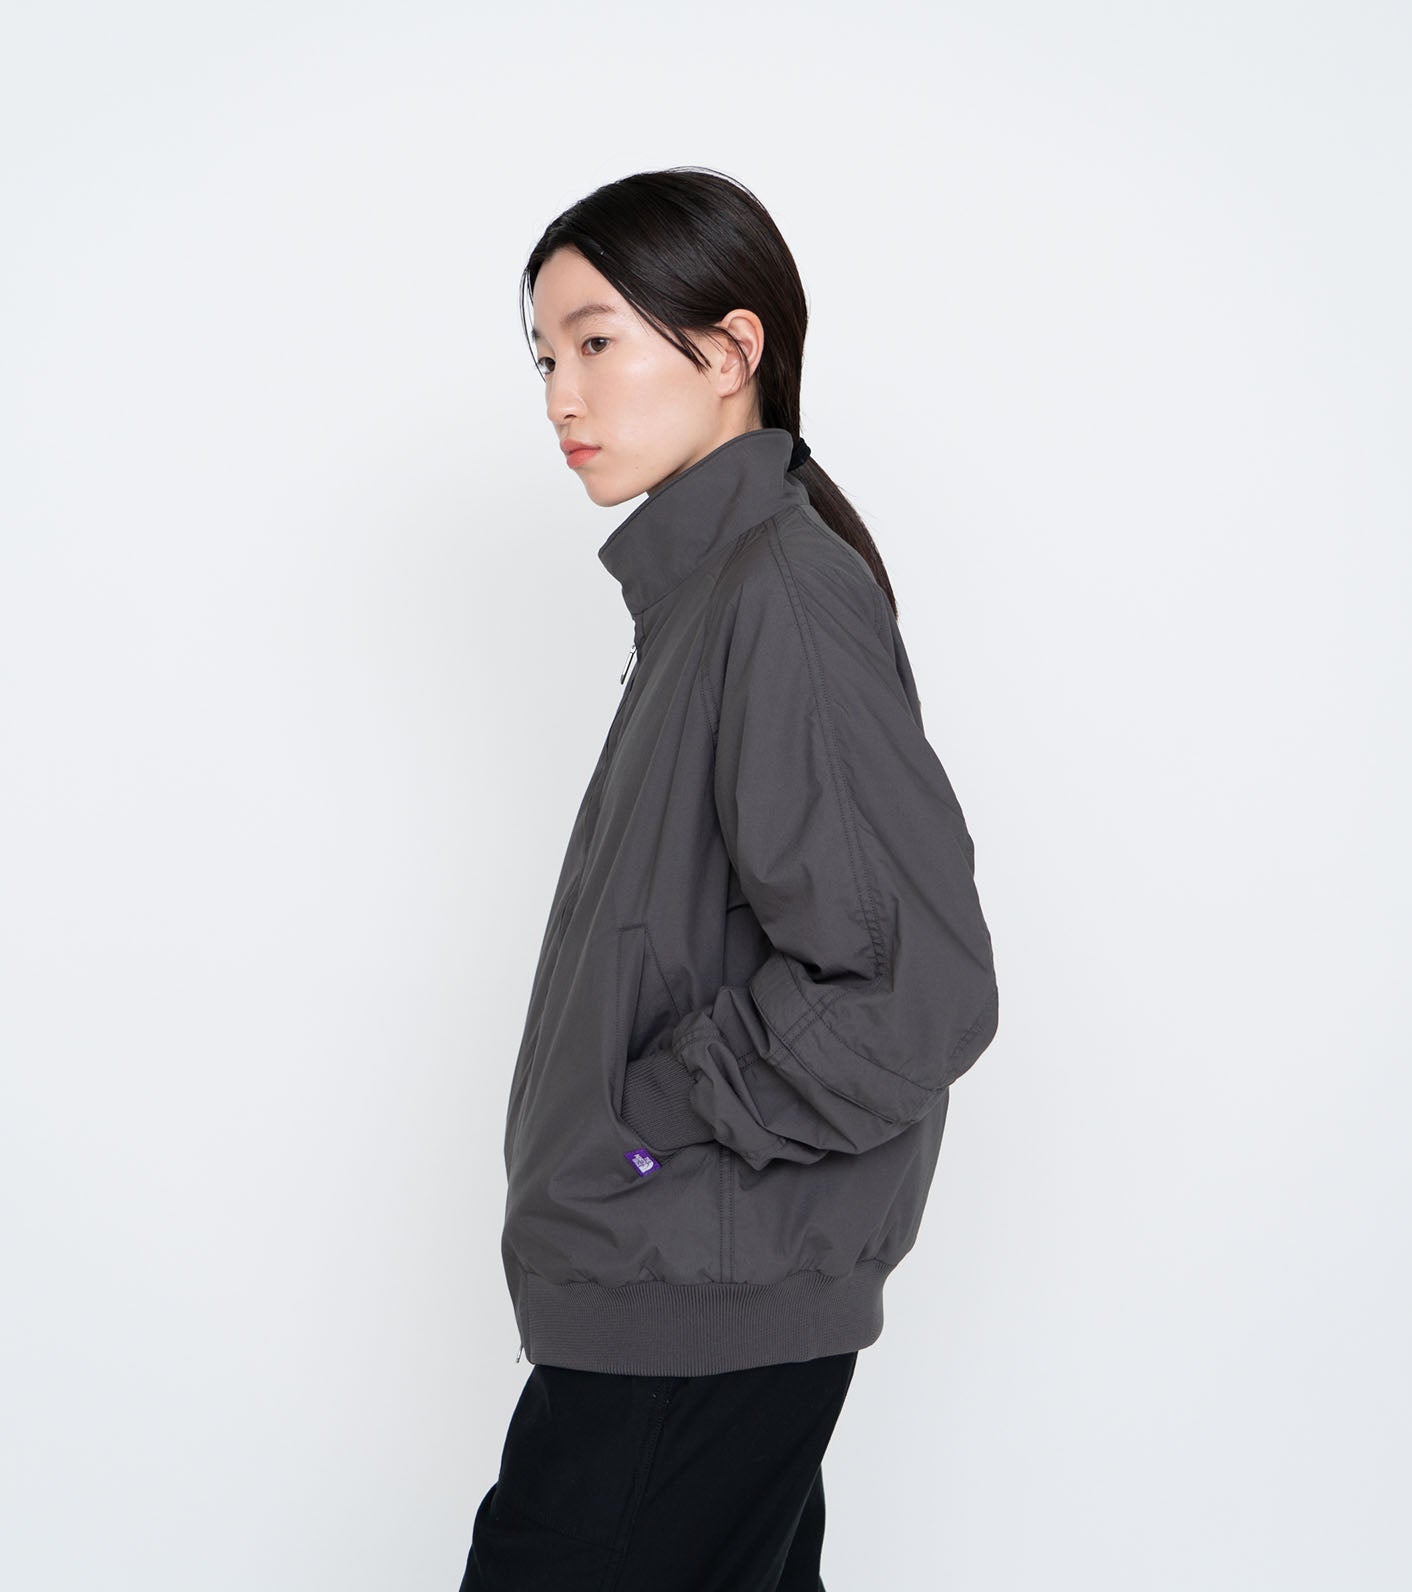 THE NORTH FACE PURPLE LABEL 65/35 Field Insulation Jacket